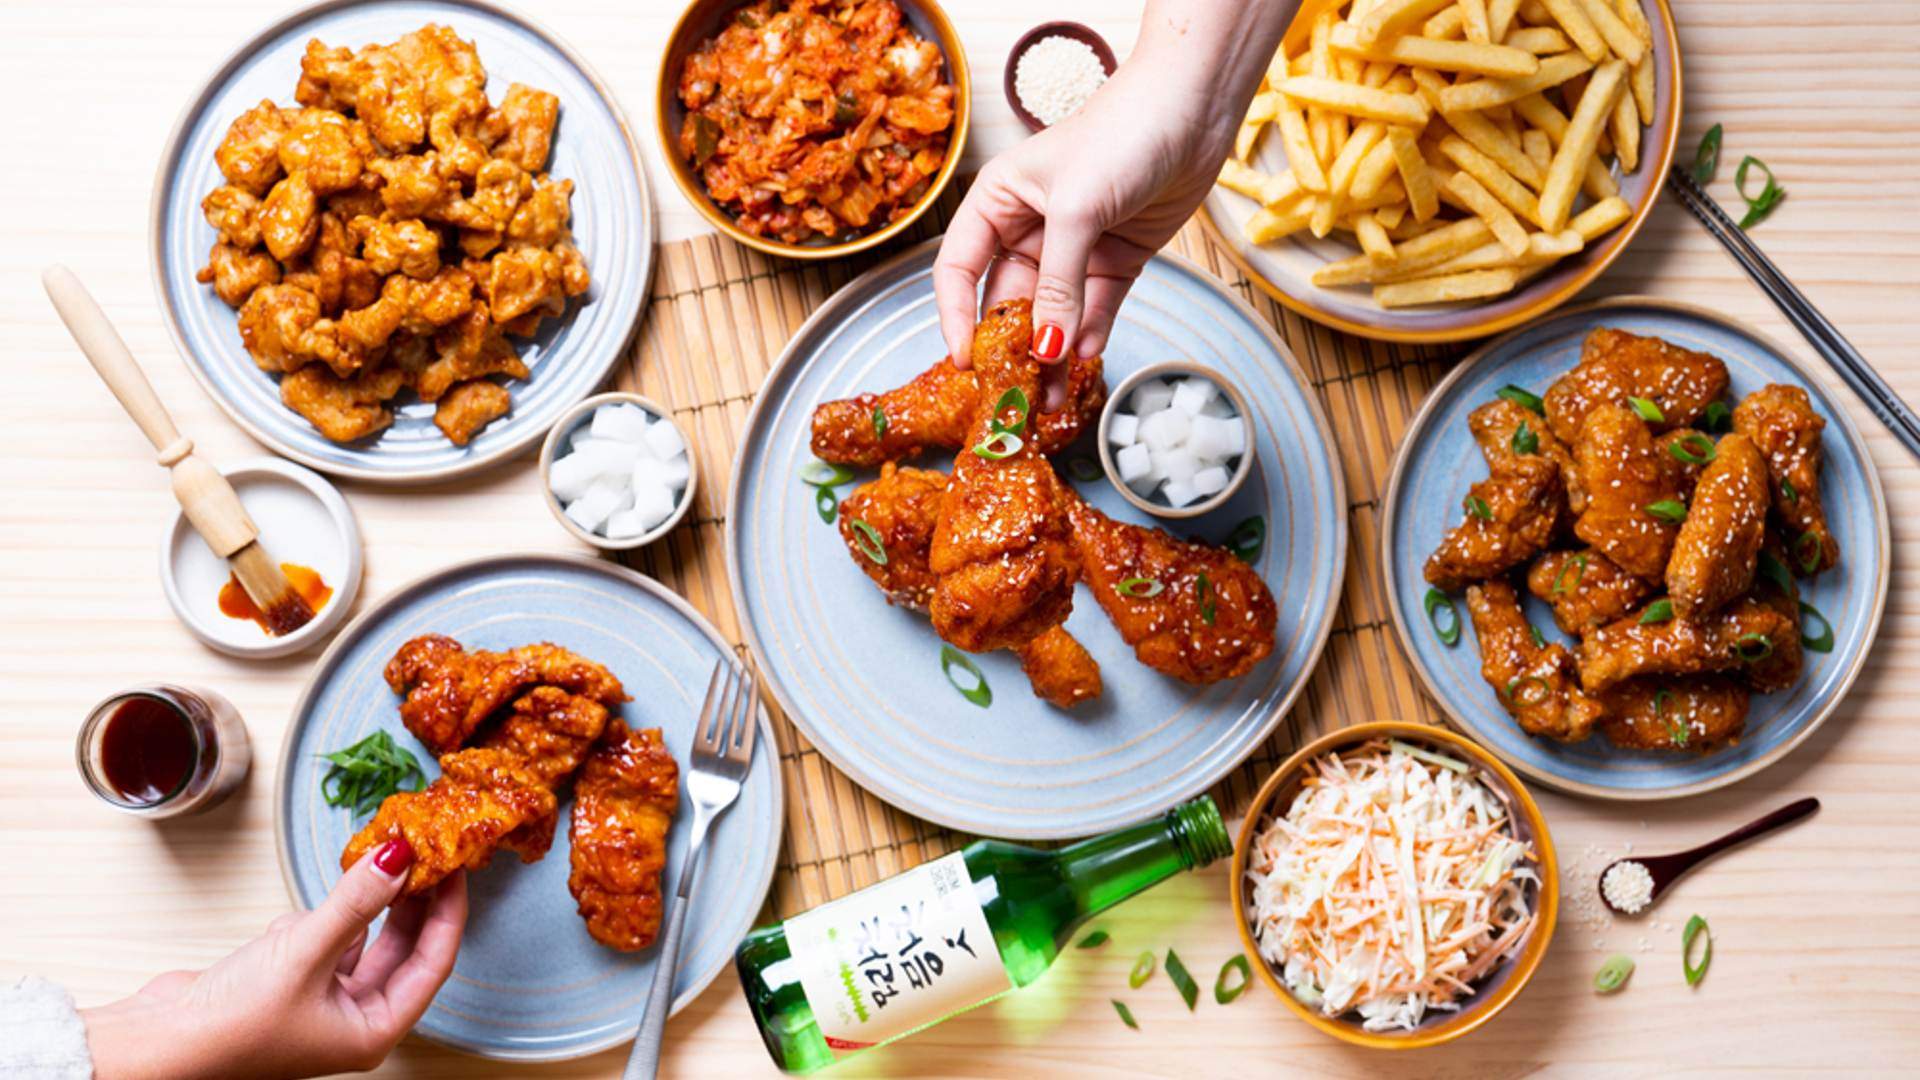 Table filled with fried chicken and side dishes